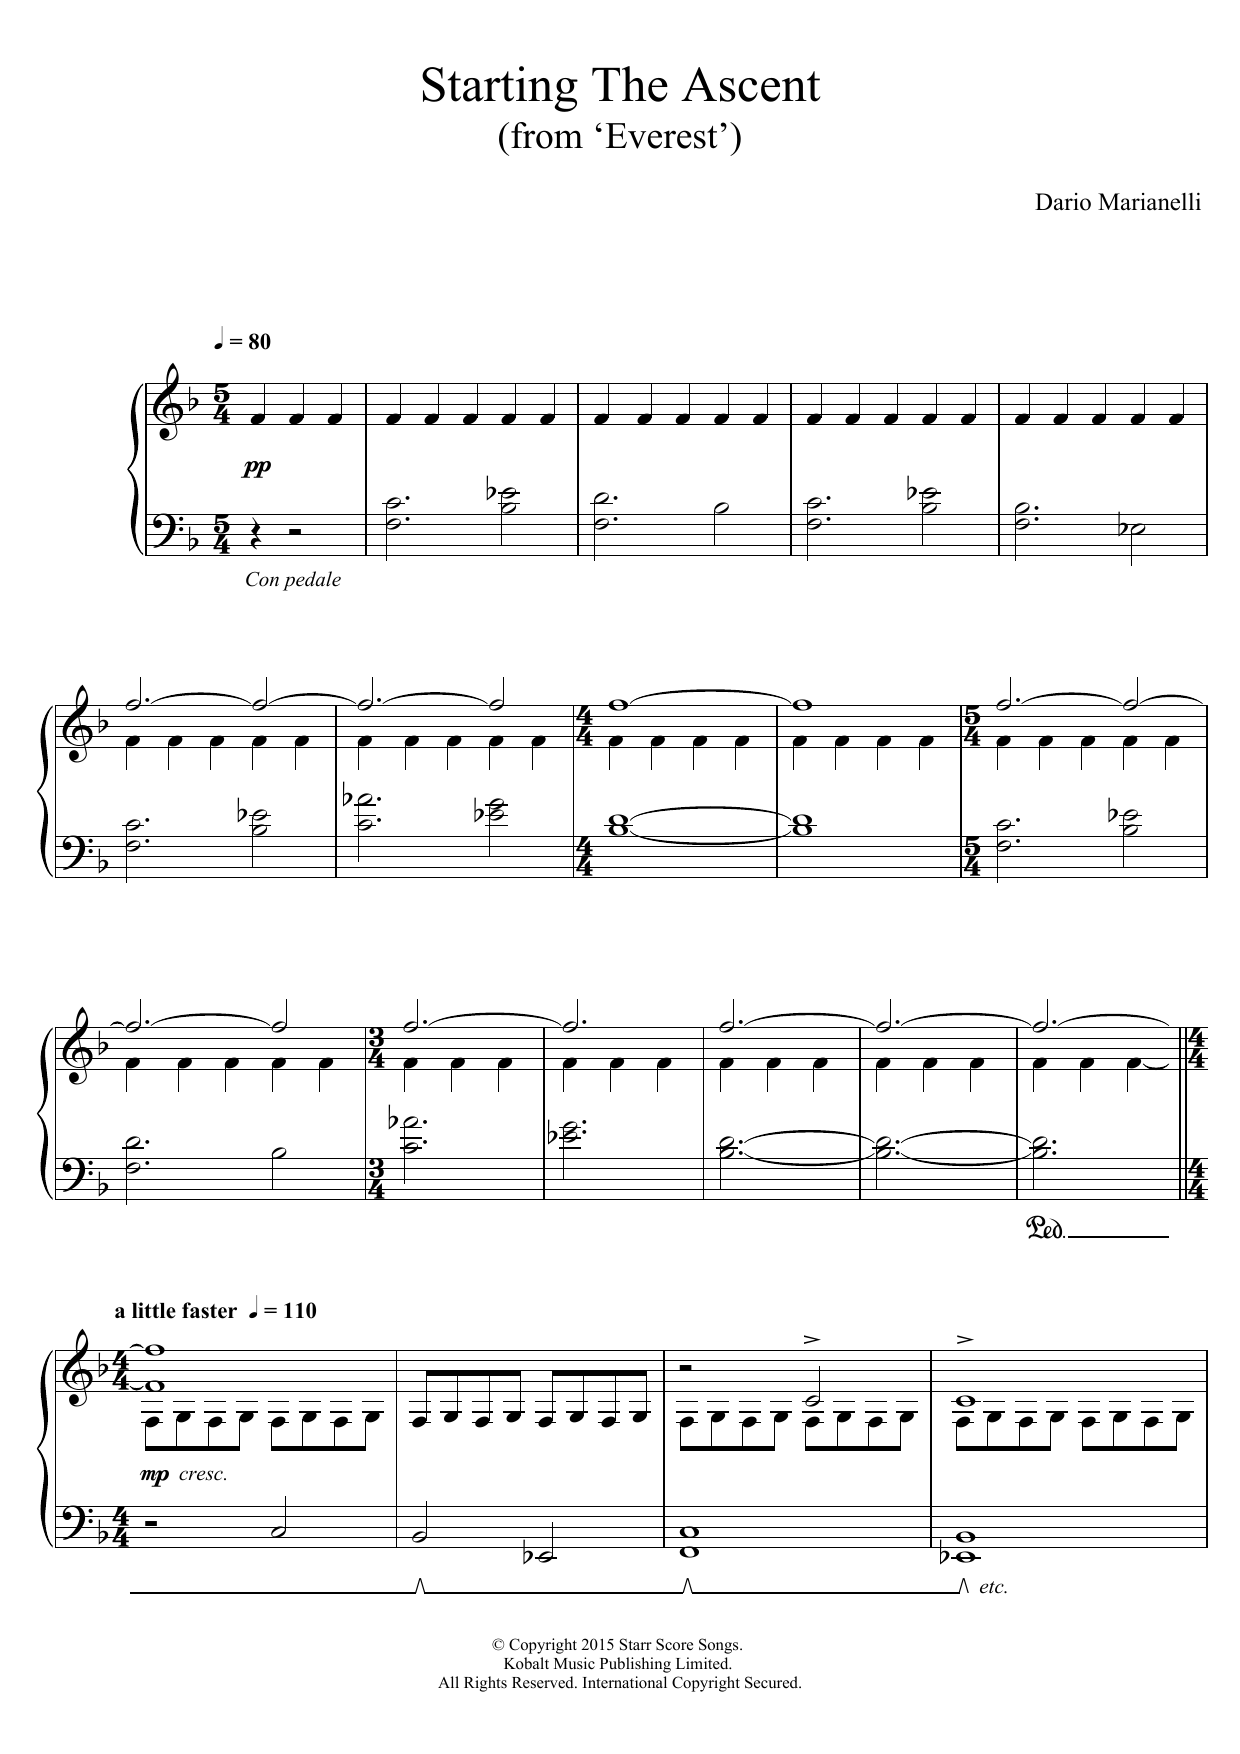 Download Dario Marianelli Starting The Ascent (From 'Everest') Sheet Music